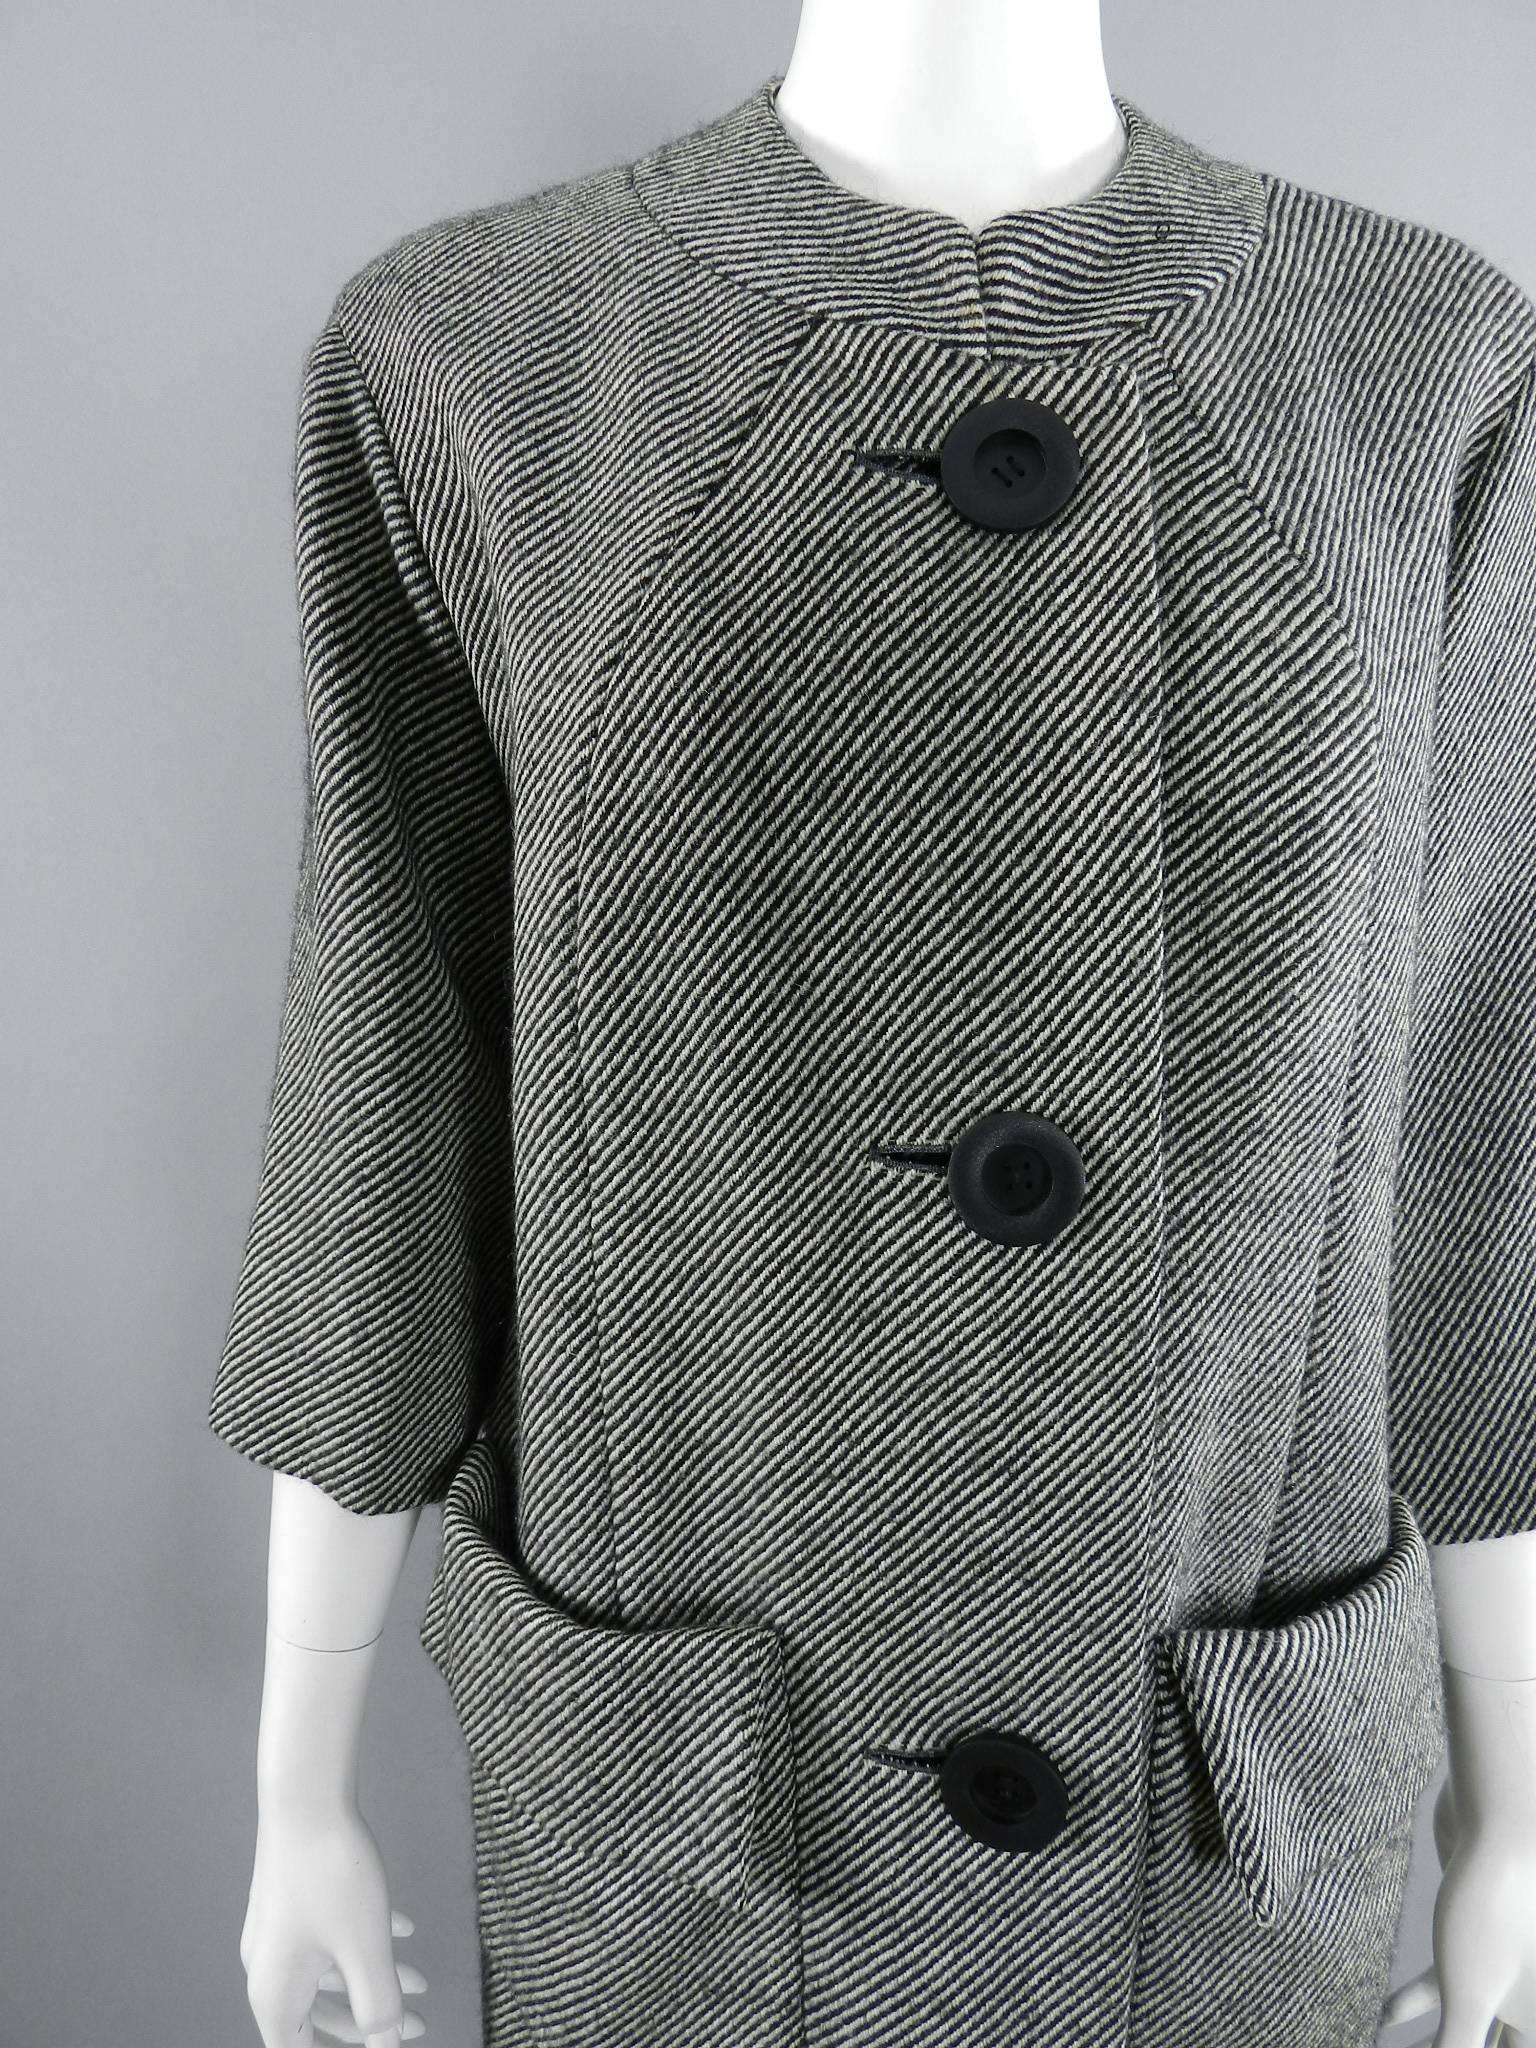 Women's Pierre Cardin Jeunesse Black and White Tweed Wool Skirt and Coat Set, 1960s 